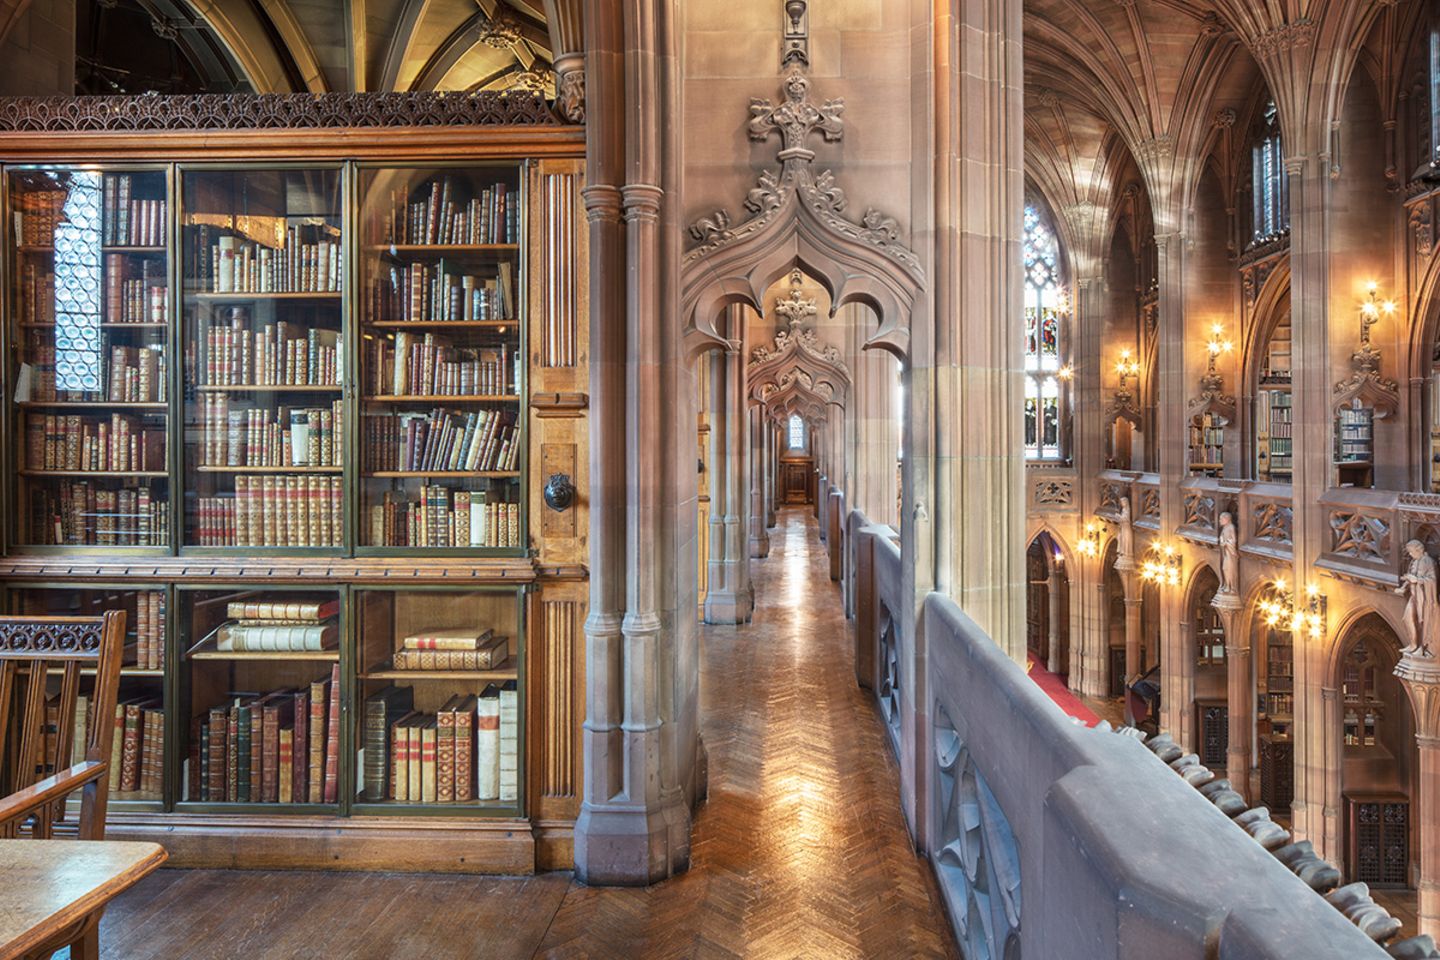 Cathedral of Books, Manchester, England